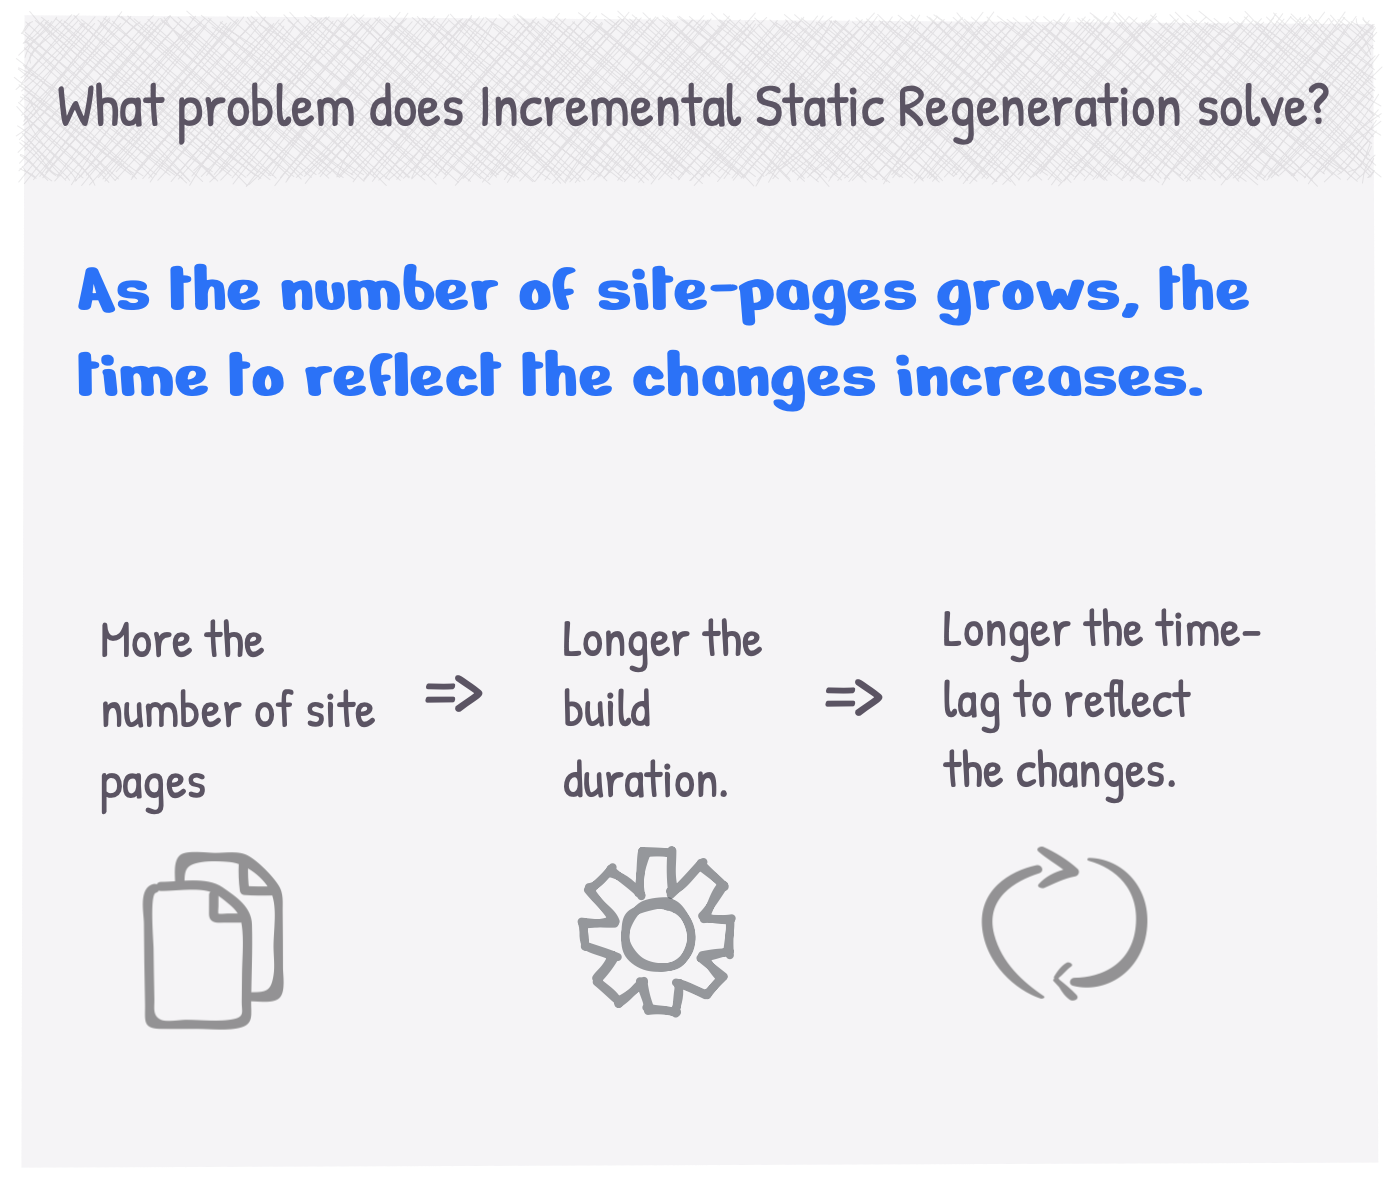 What problem does Incremental Static Re-generation solve?